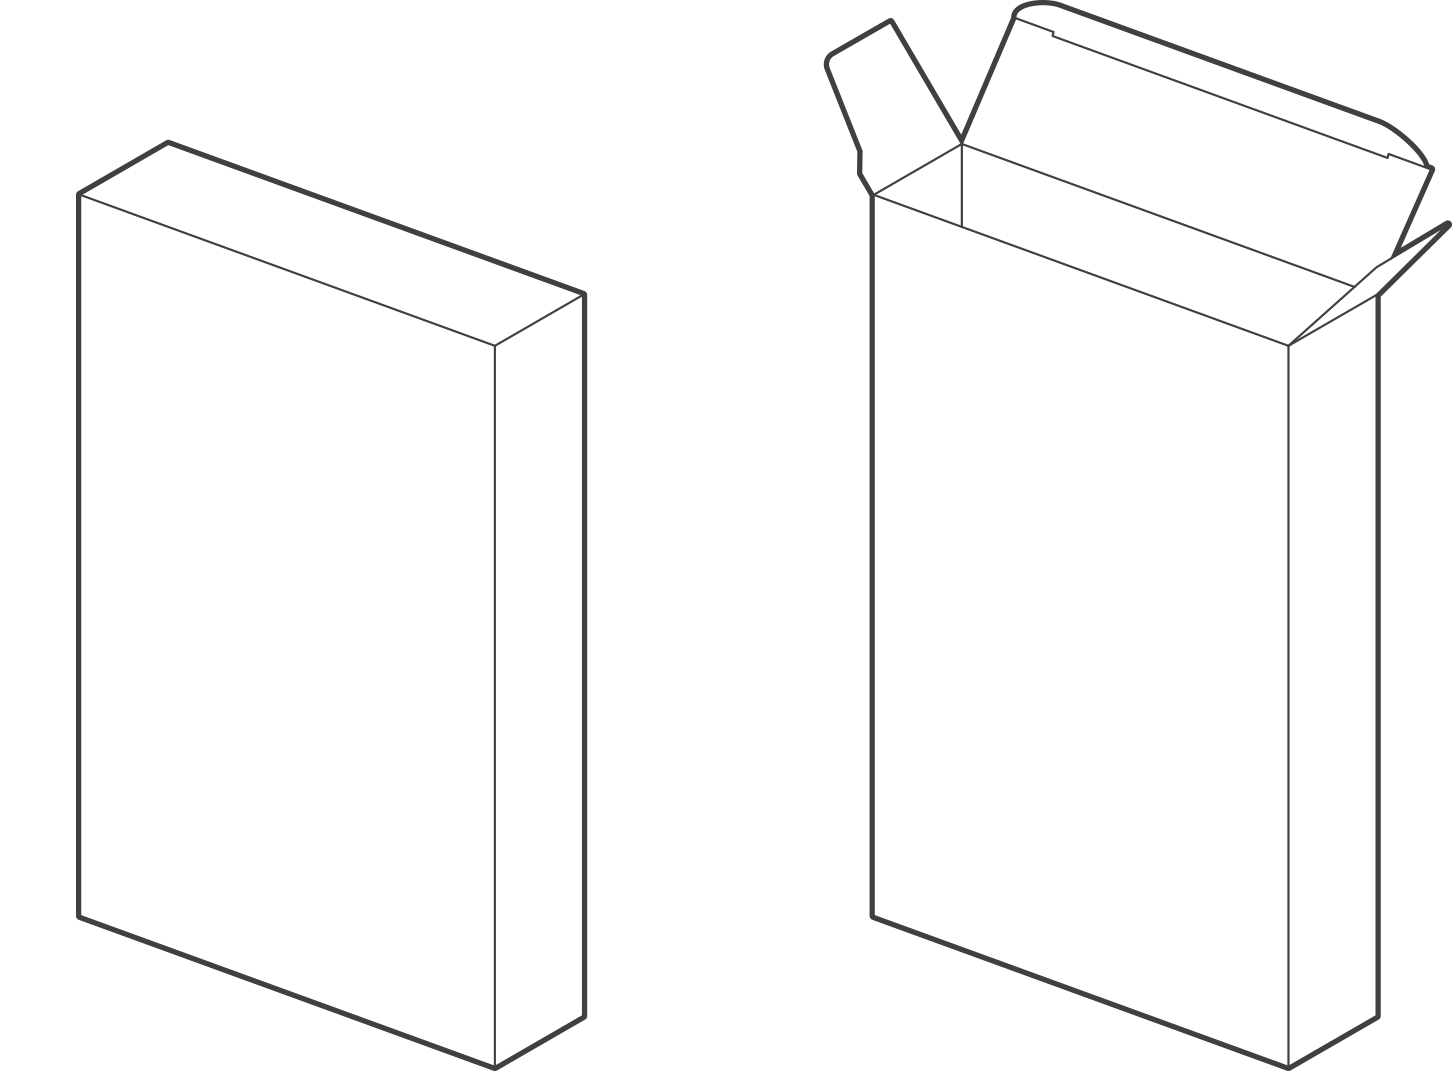 A drawing of this type of packaging